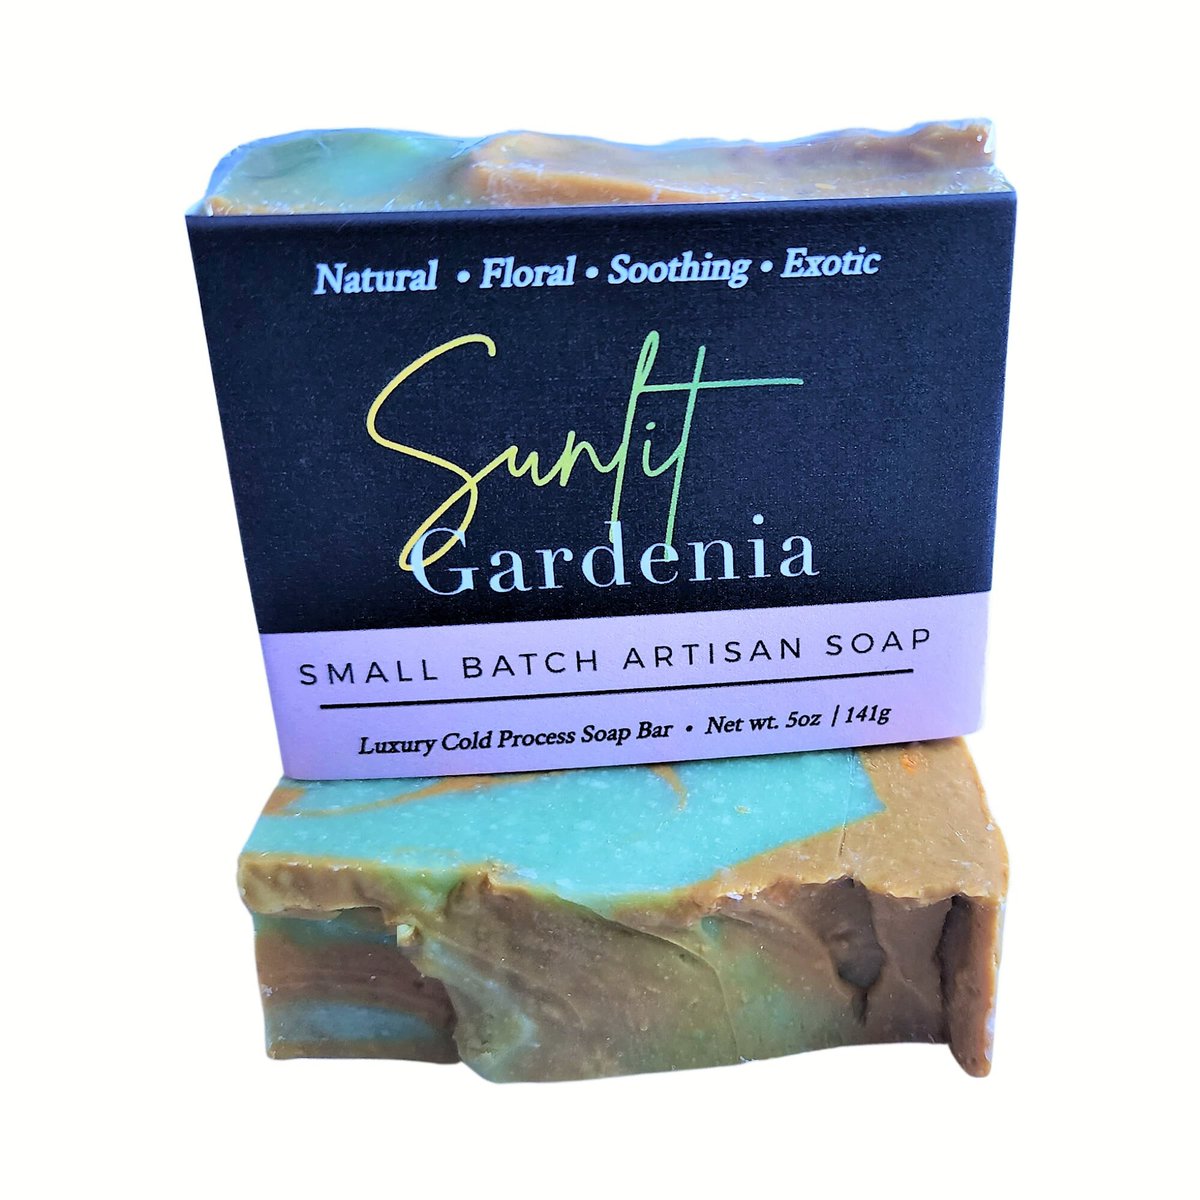 Gardenia Soap, Floral Soap, Vegan Soap, Soap Gift, Natural Soap, Cold Process Soap, Spring Soap, Soap for her, , Best Seller, Birthday Gift tuppu.net/379bb6c #gifts #vegan #Soapgift #selfcare #handmadesoap #shopsmall #Christmasgifts #DeShawnMarie #NaturalSoap